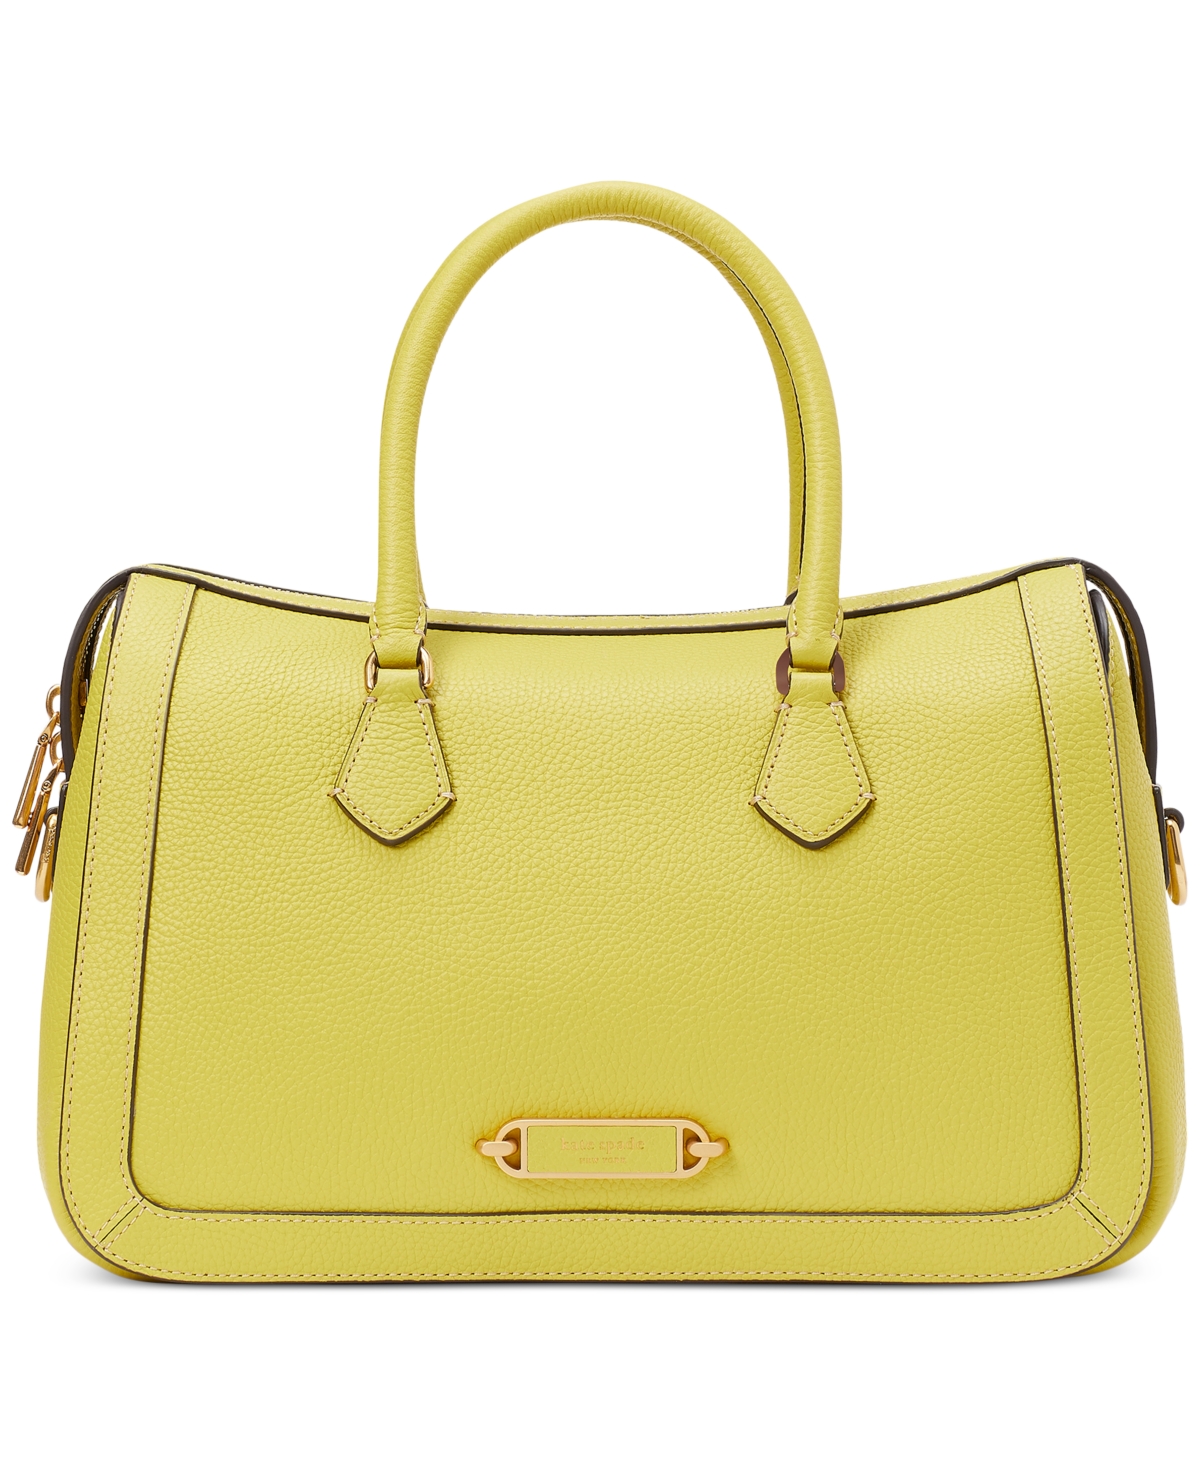 kate spade new york Gramercy Pebbled Leather Small Satchel